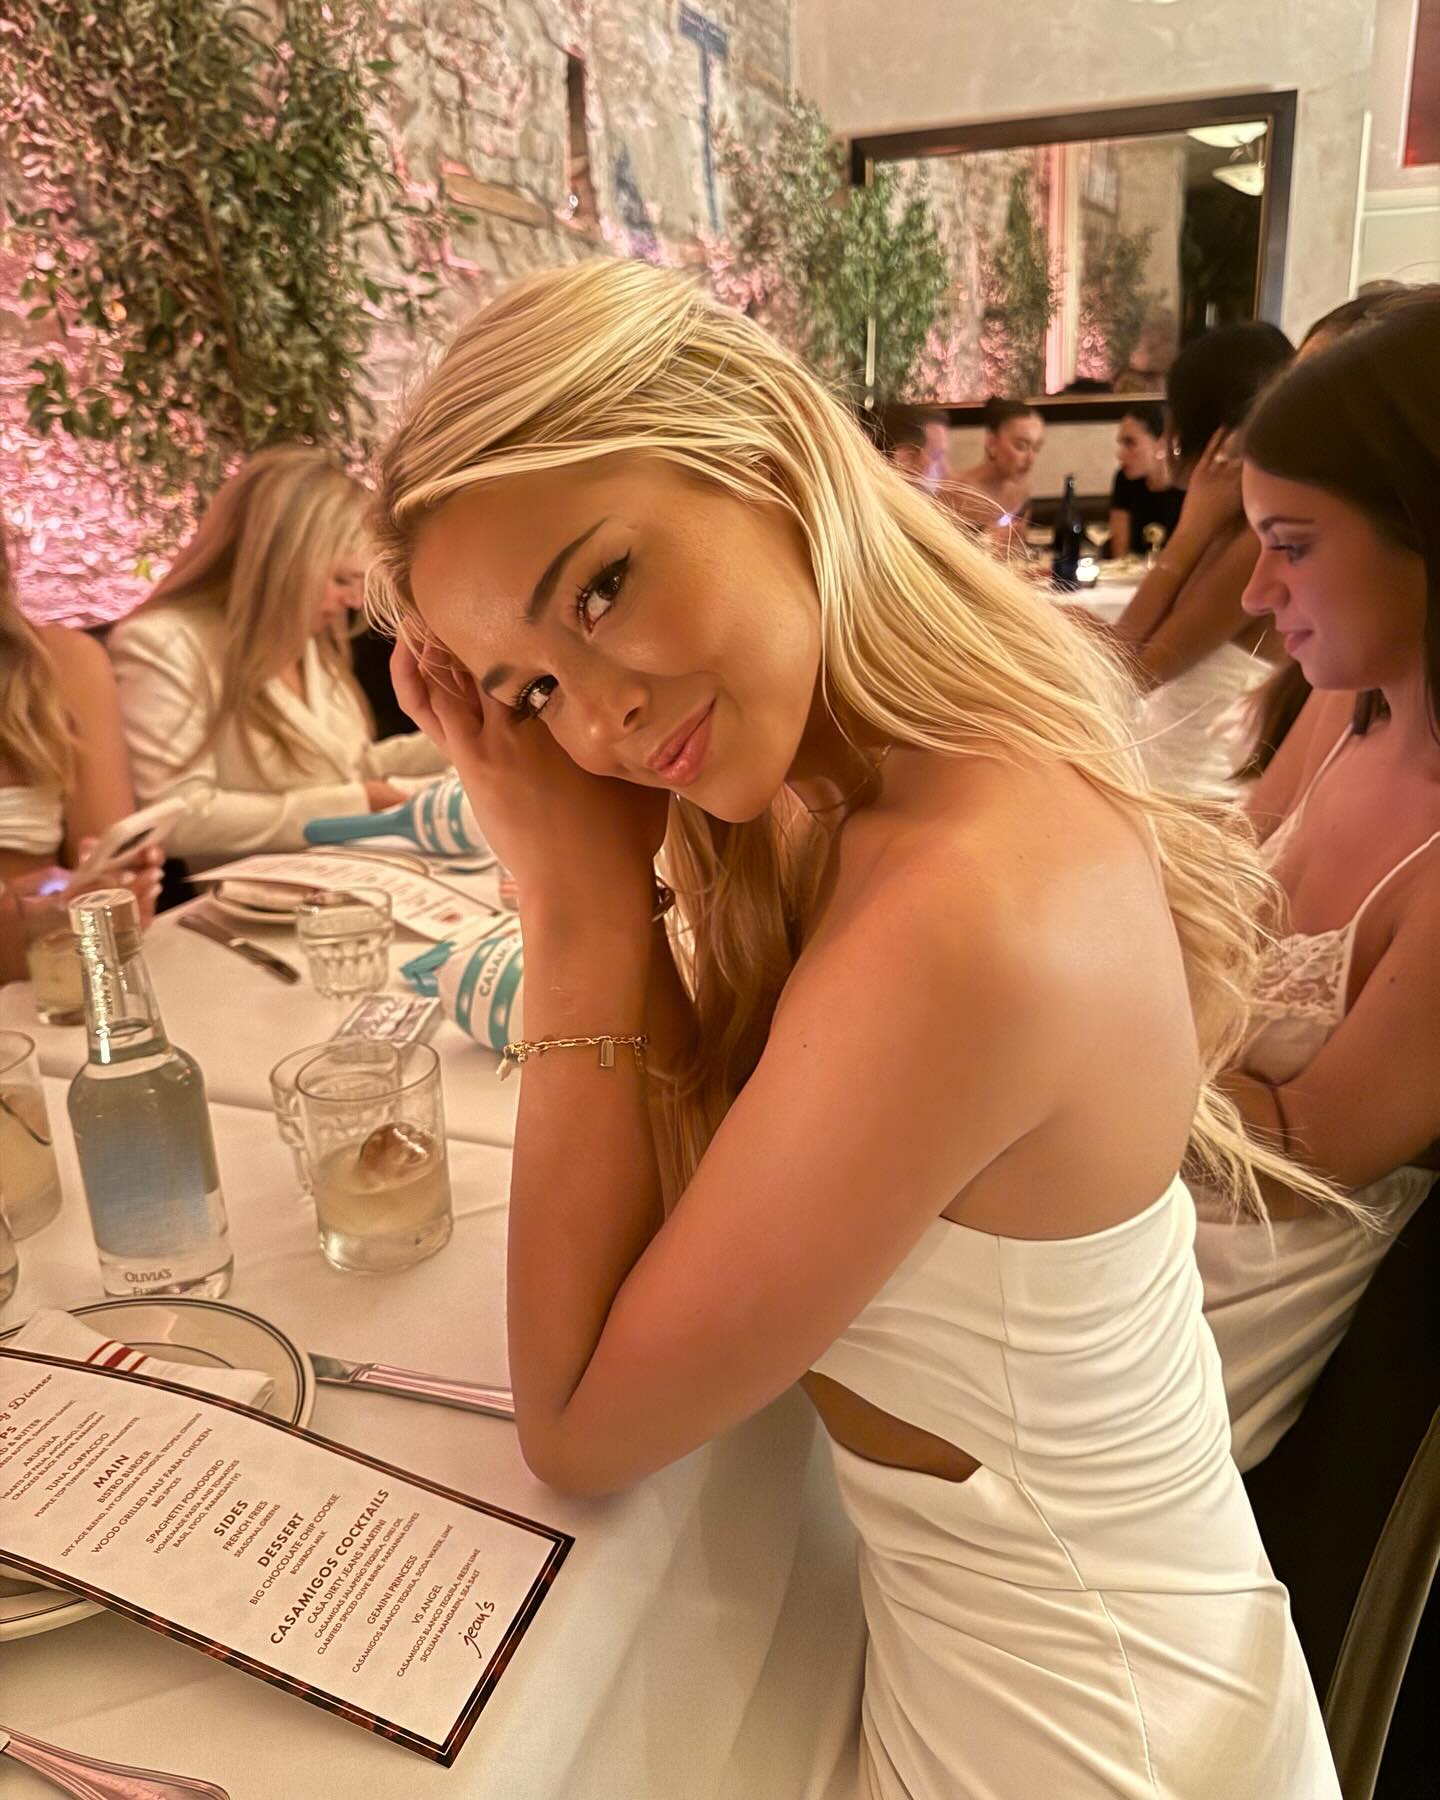 The LSU gymnast star Dunne had gone to a fancy restaurant in Manhattan with her friends on the same day